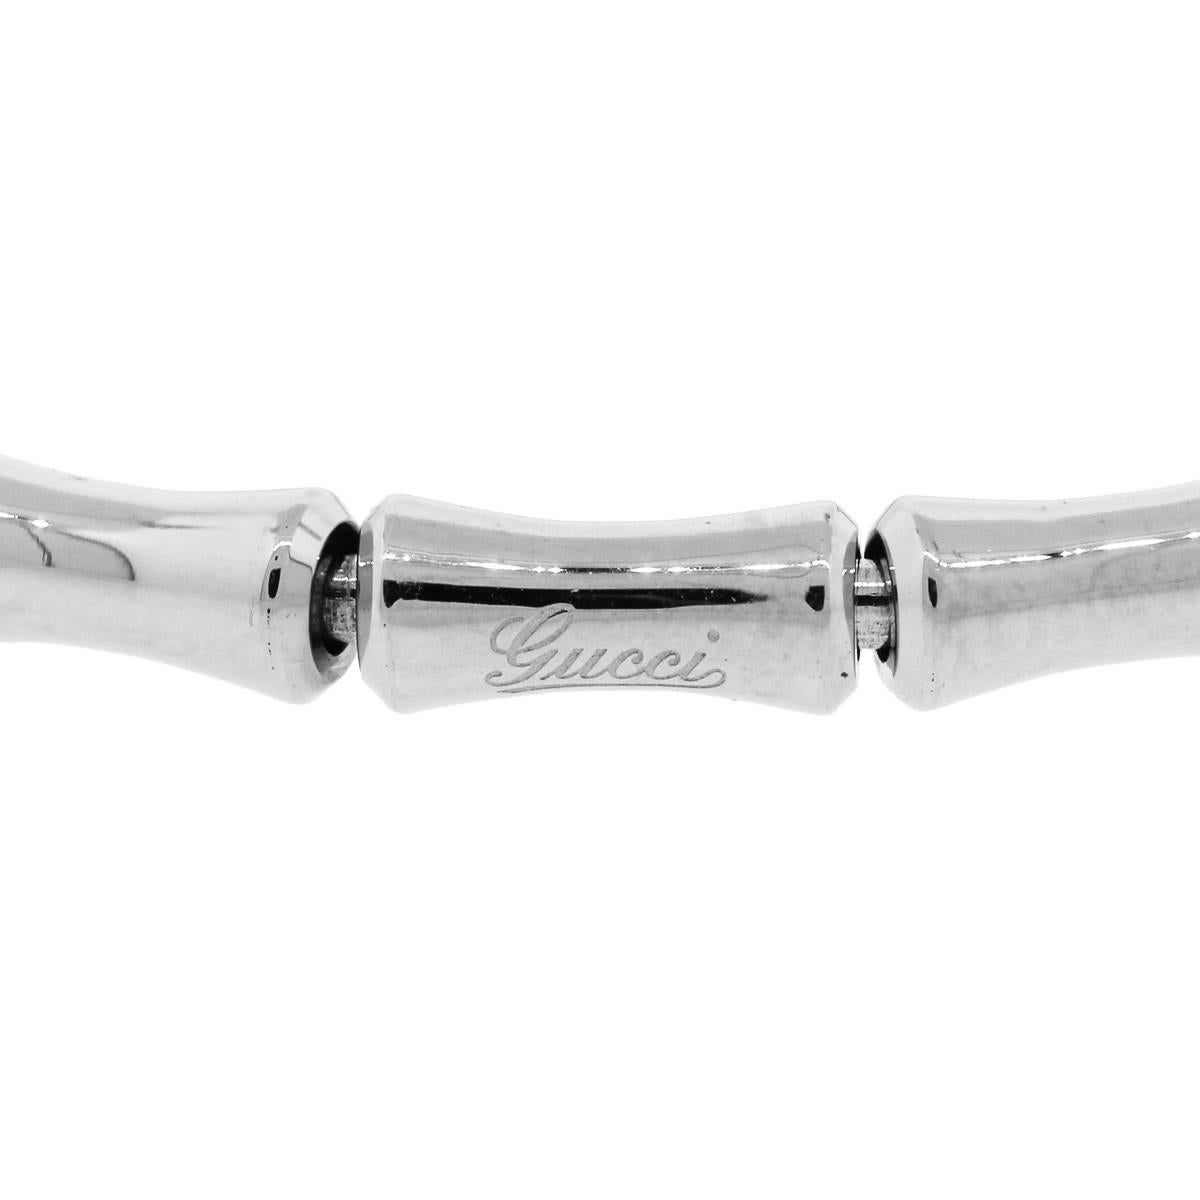 Designer: Gucci
Material: 18k white gold
Clasp: No clasp, bracelet stretches
Total Weight: 8.8g (5.7dwt)
Measurements: This bracelet will fit up to a 7″ wrist
Additional Details: This item comes with a presentation box!
SKU: G6844